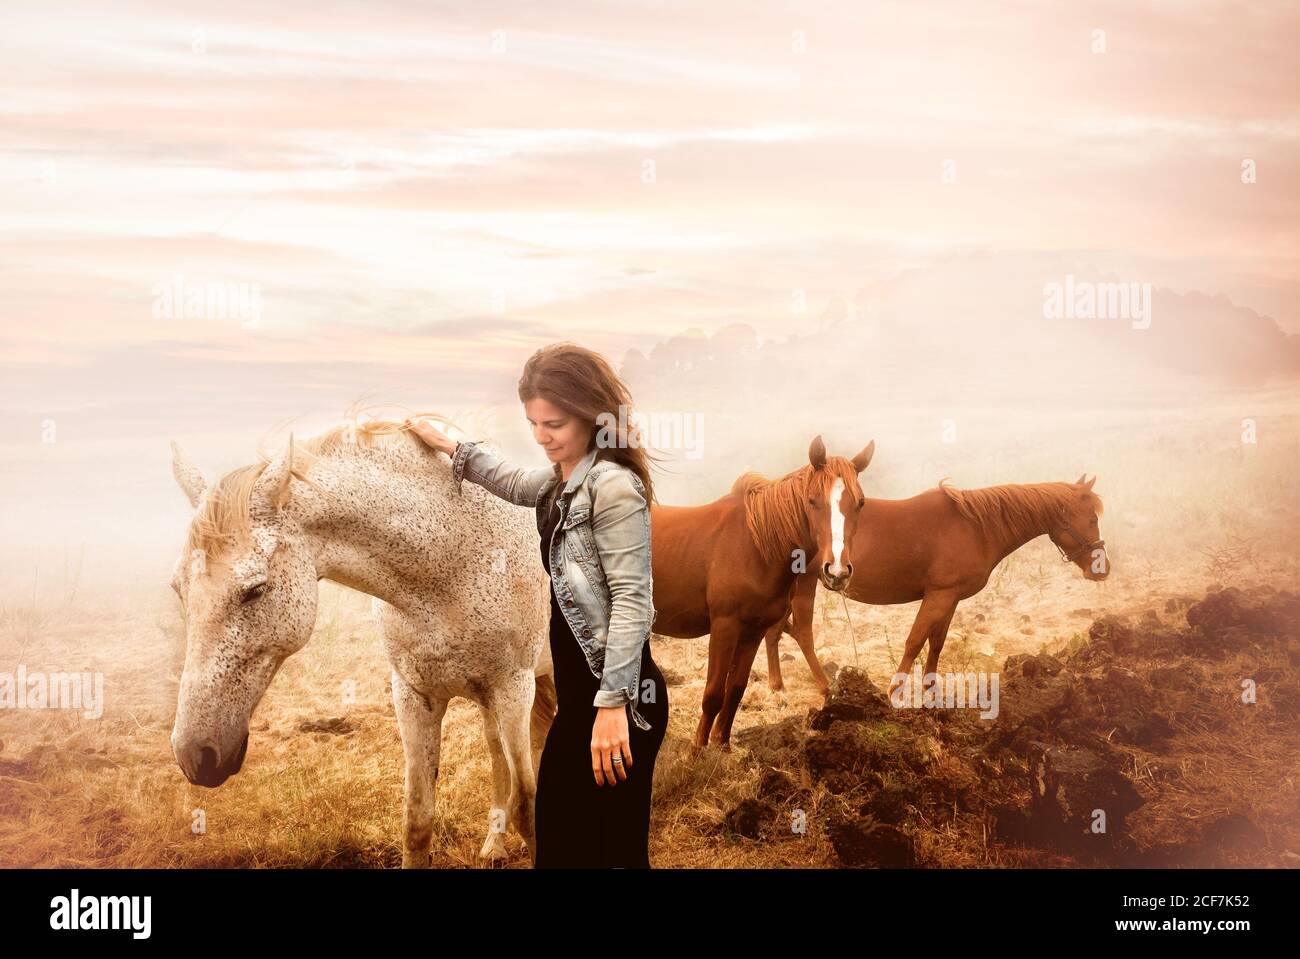 Beautiful scenery of a young Woman among horses in el hierro island, canary island spain Stock Photo